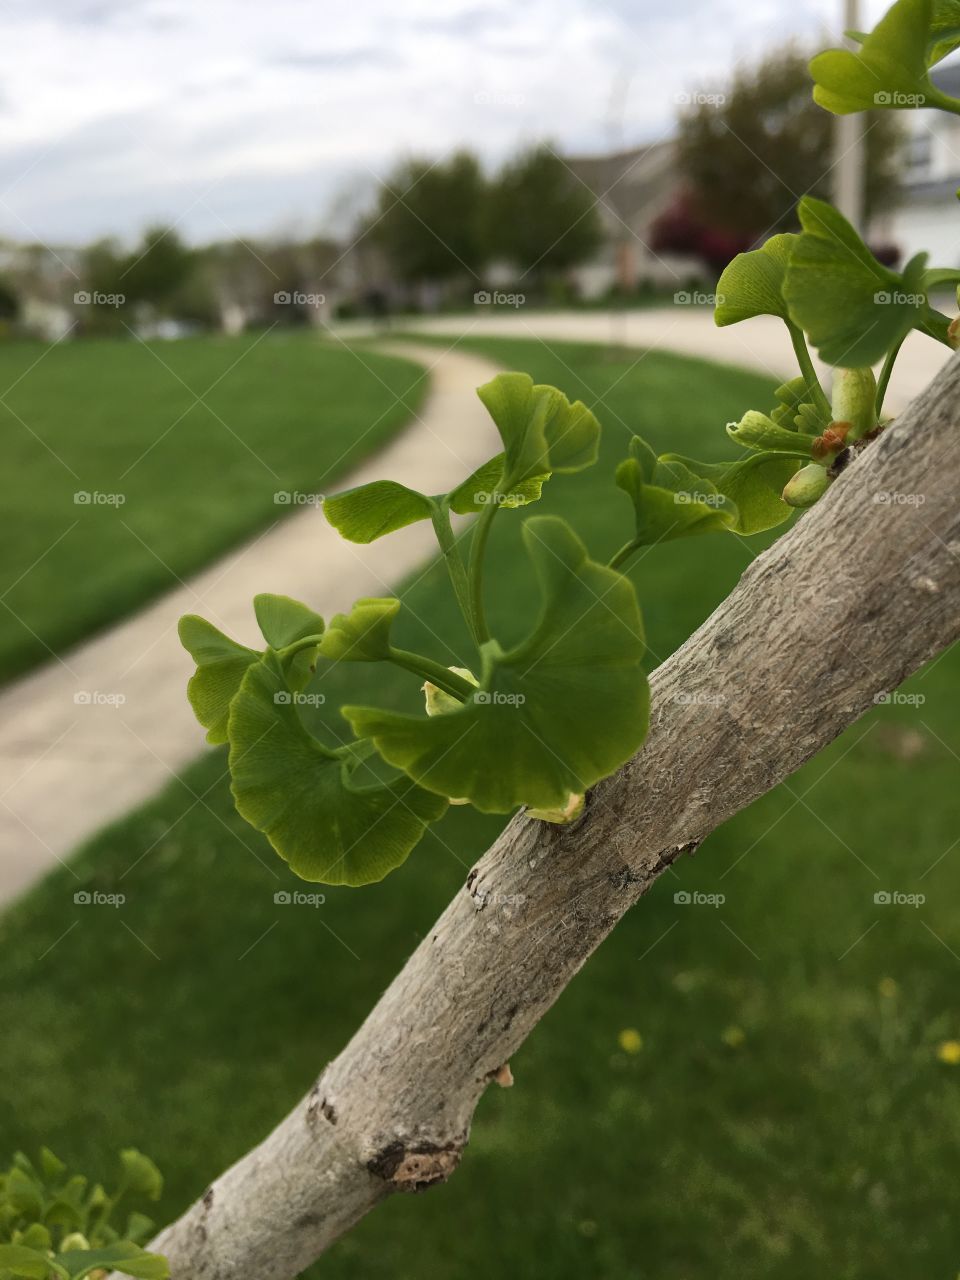 Young ginkgo leaves on a young ginkgo tree